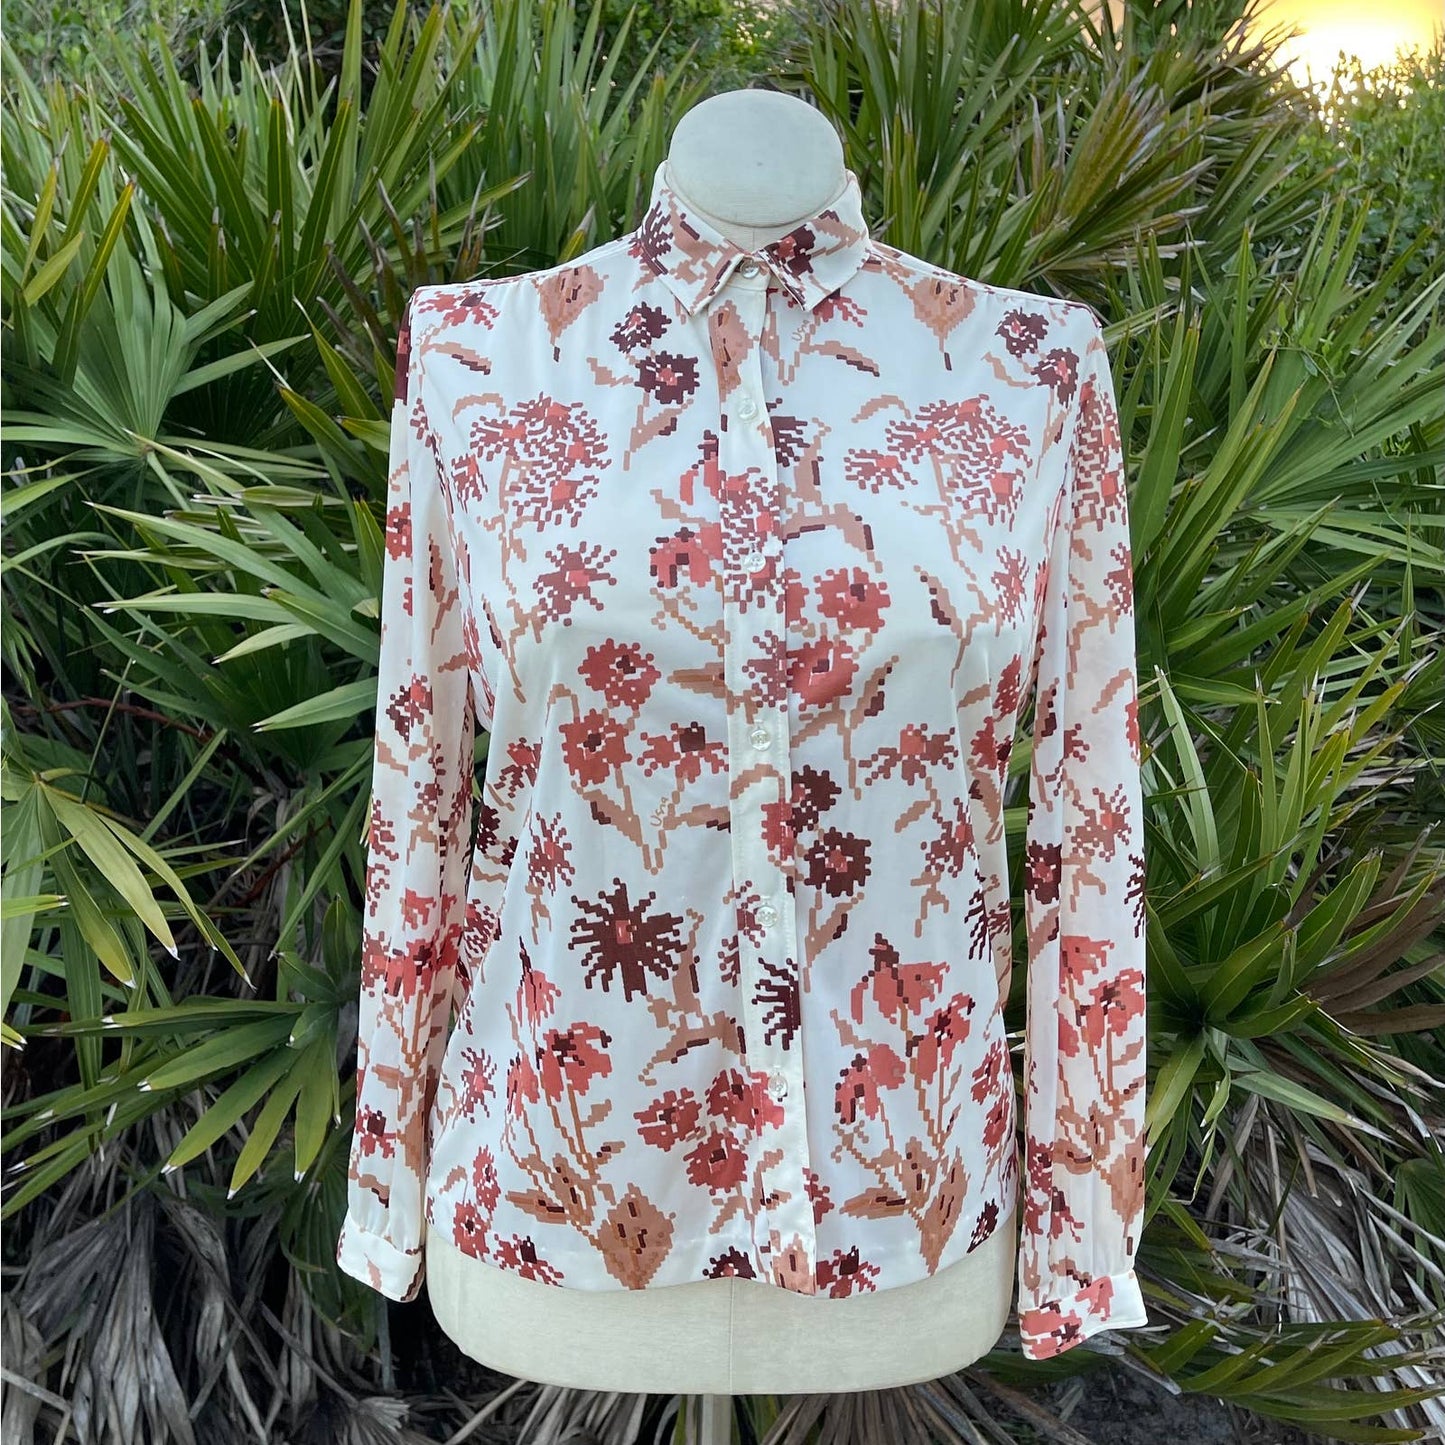 70s Vintage Cream Blouse with Pixelated Brown Flowers Vera Neumann Size L